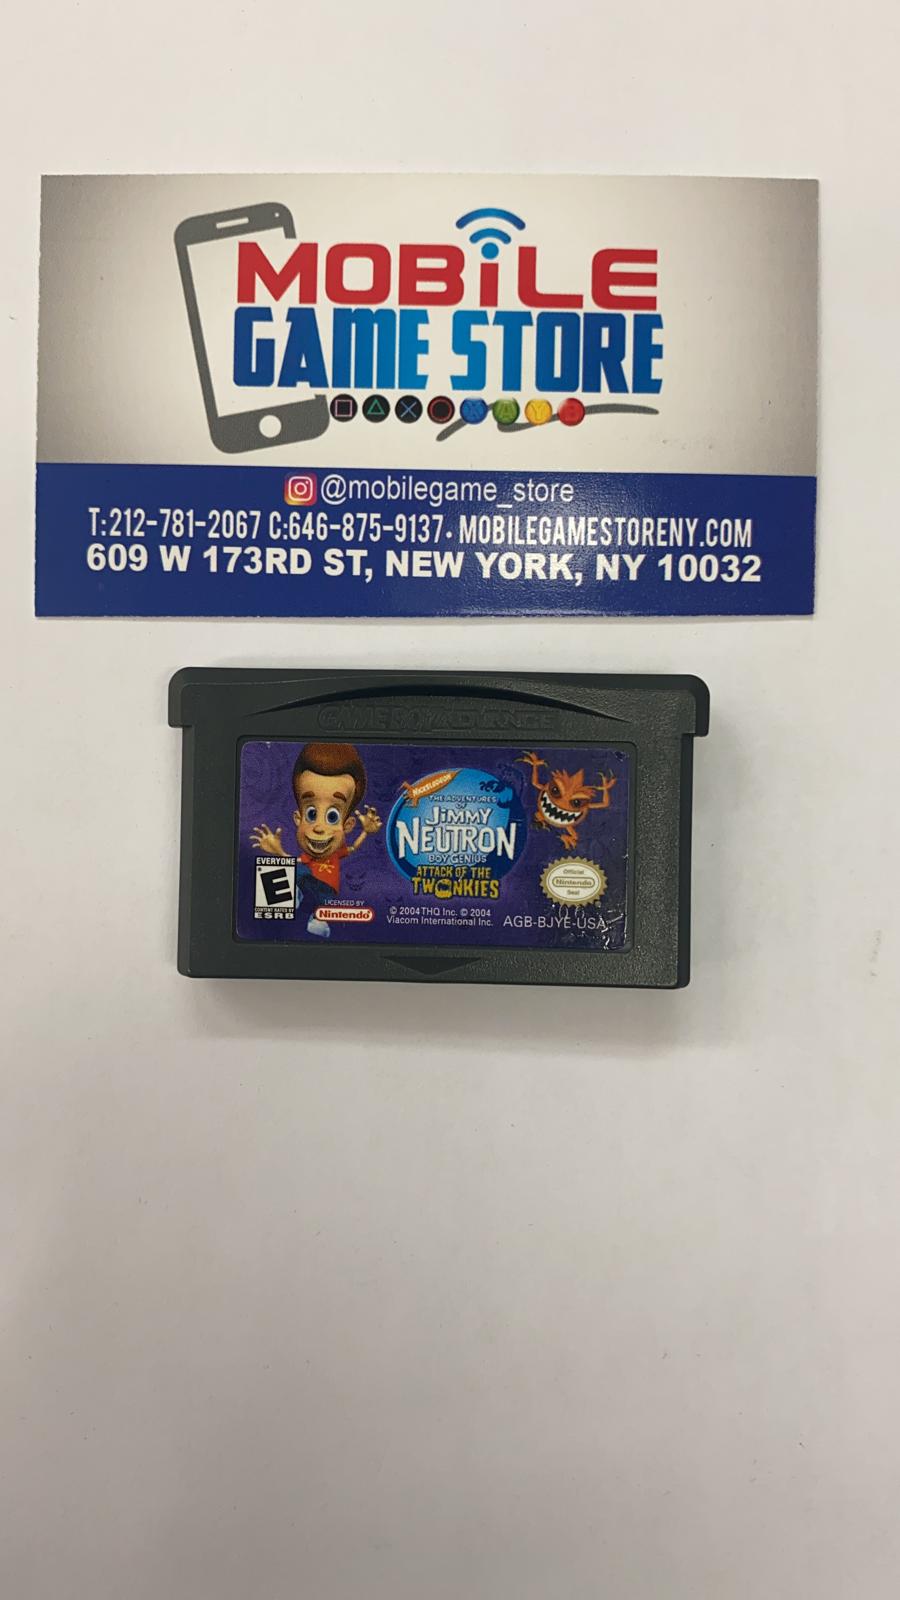 Jimmy Neutron attack of the twonkies (pre-owned)